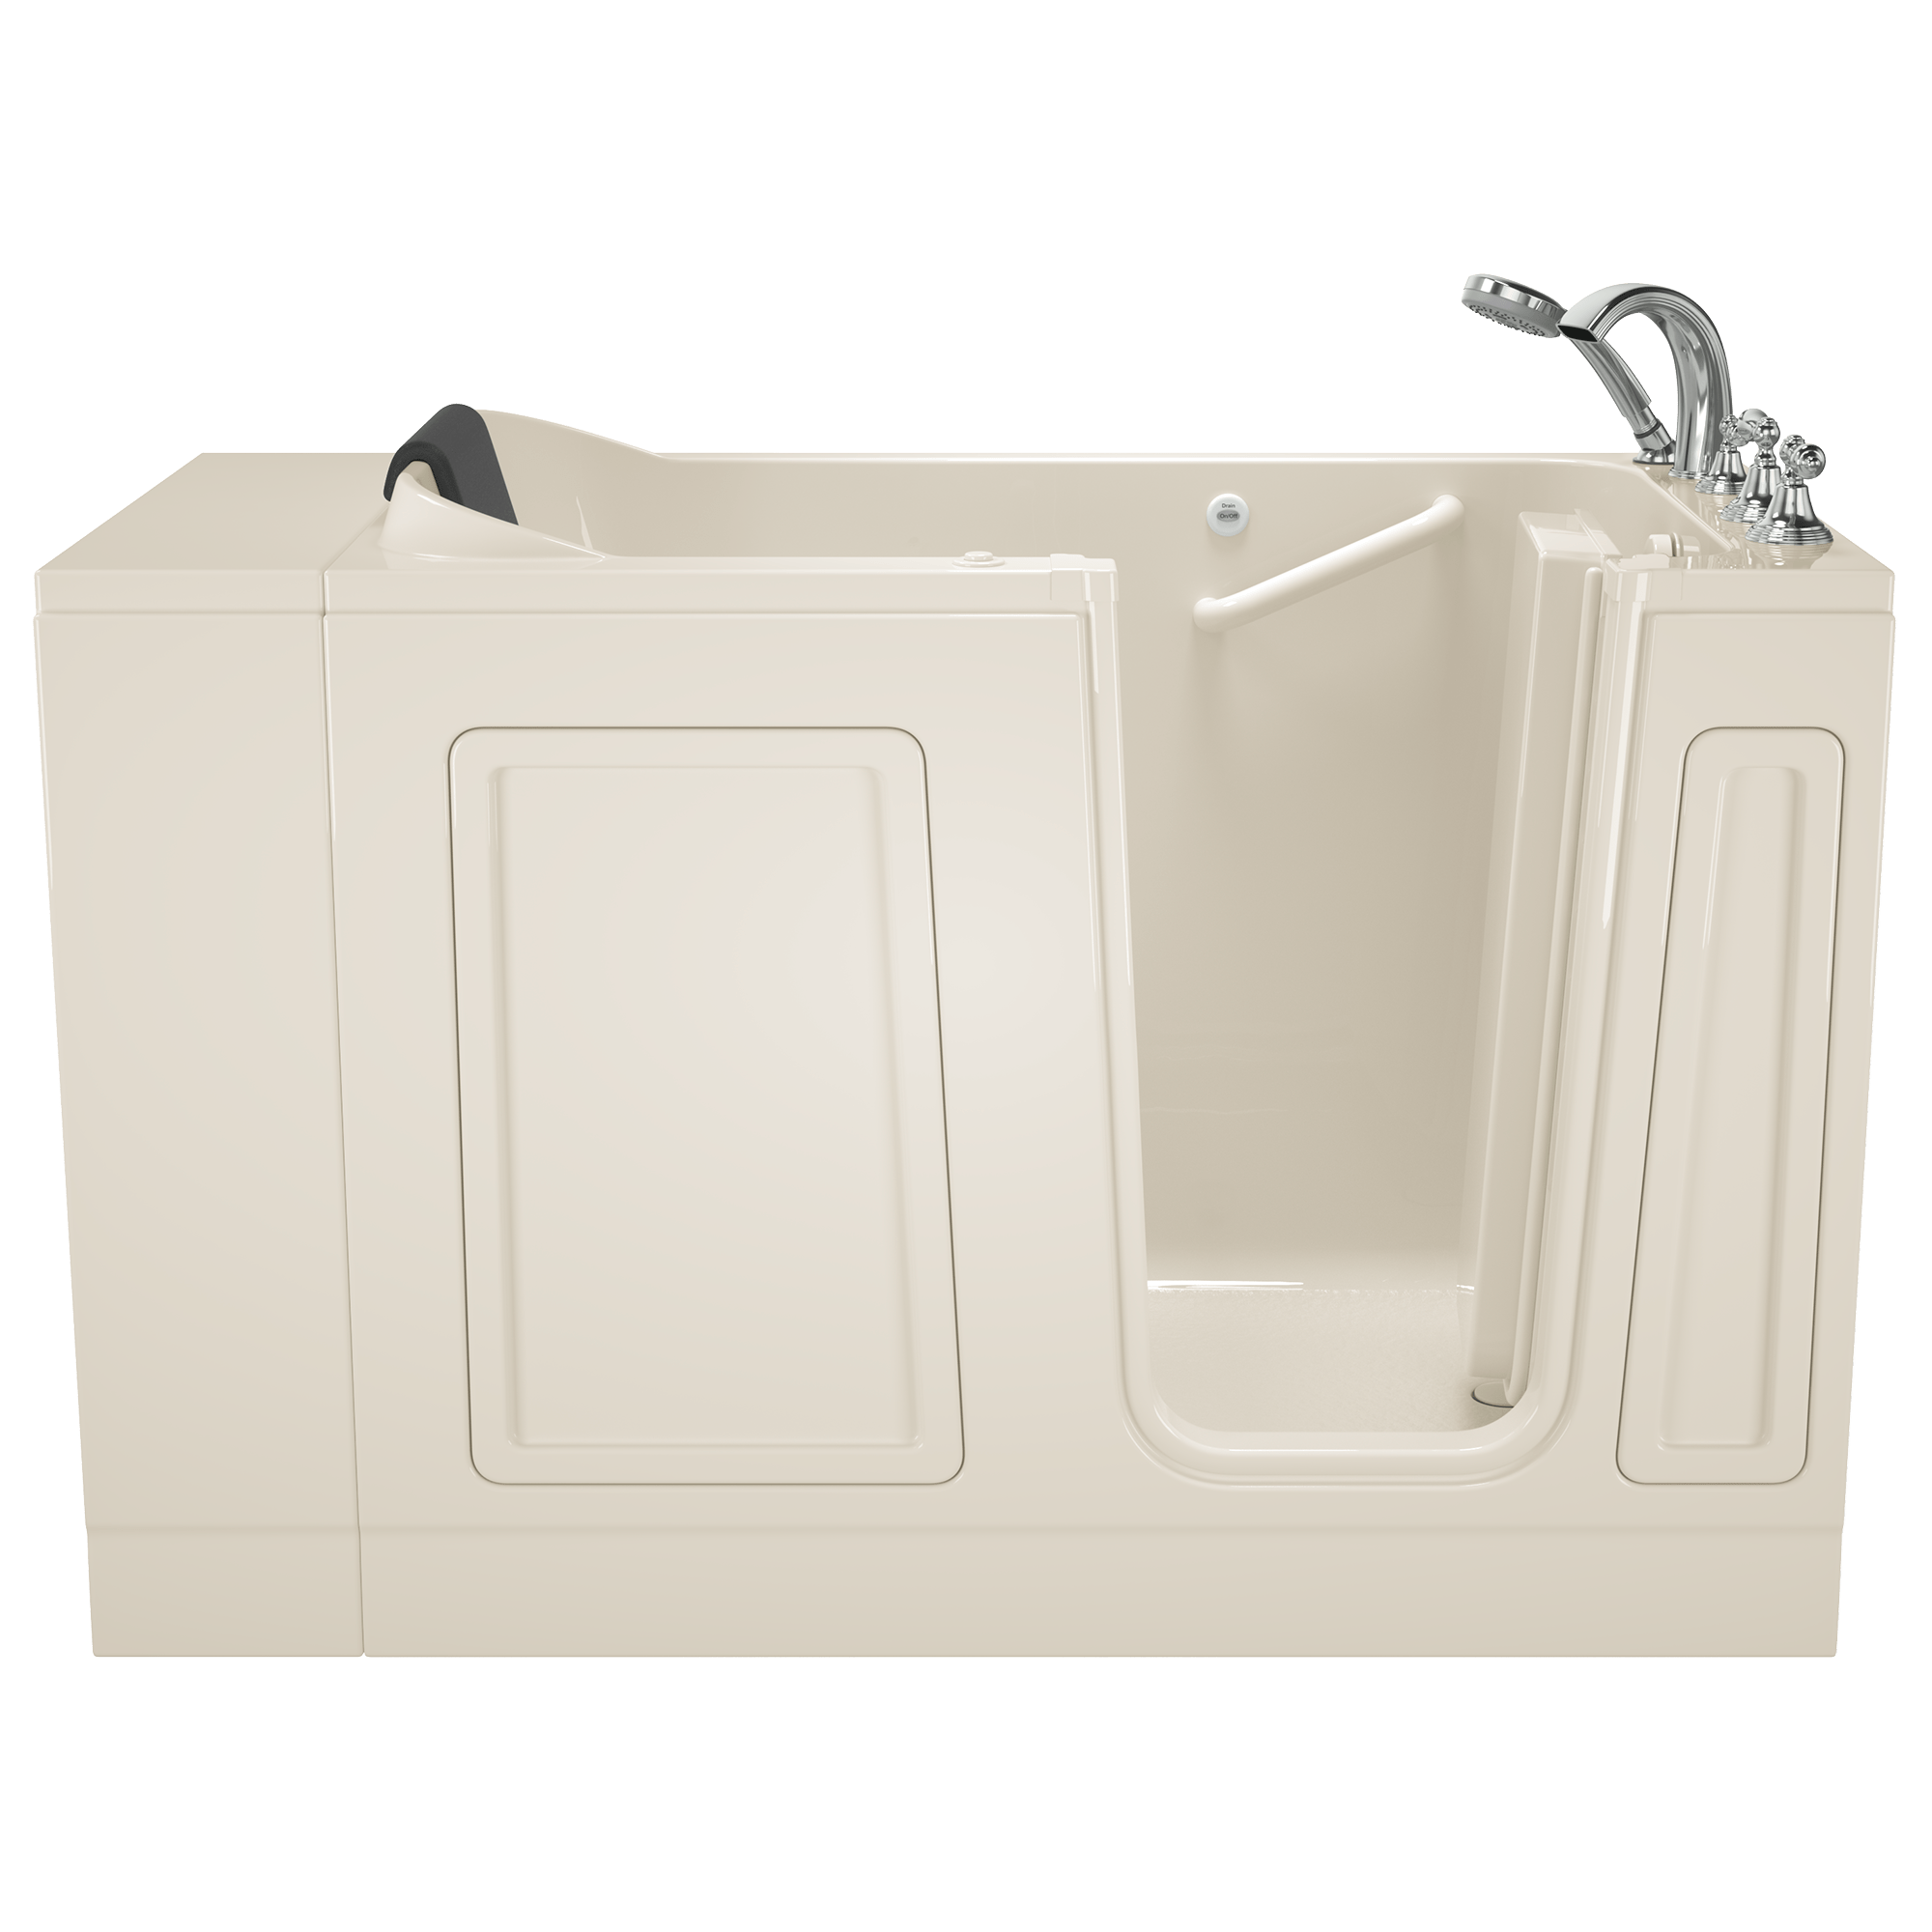 Acrylic Luxury Series 30 x 51 -Inch Walk-in Tub With Whirlpool System - Right-Hand Drain With Faucet